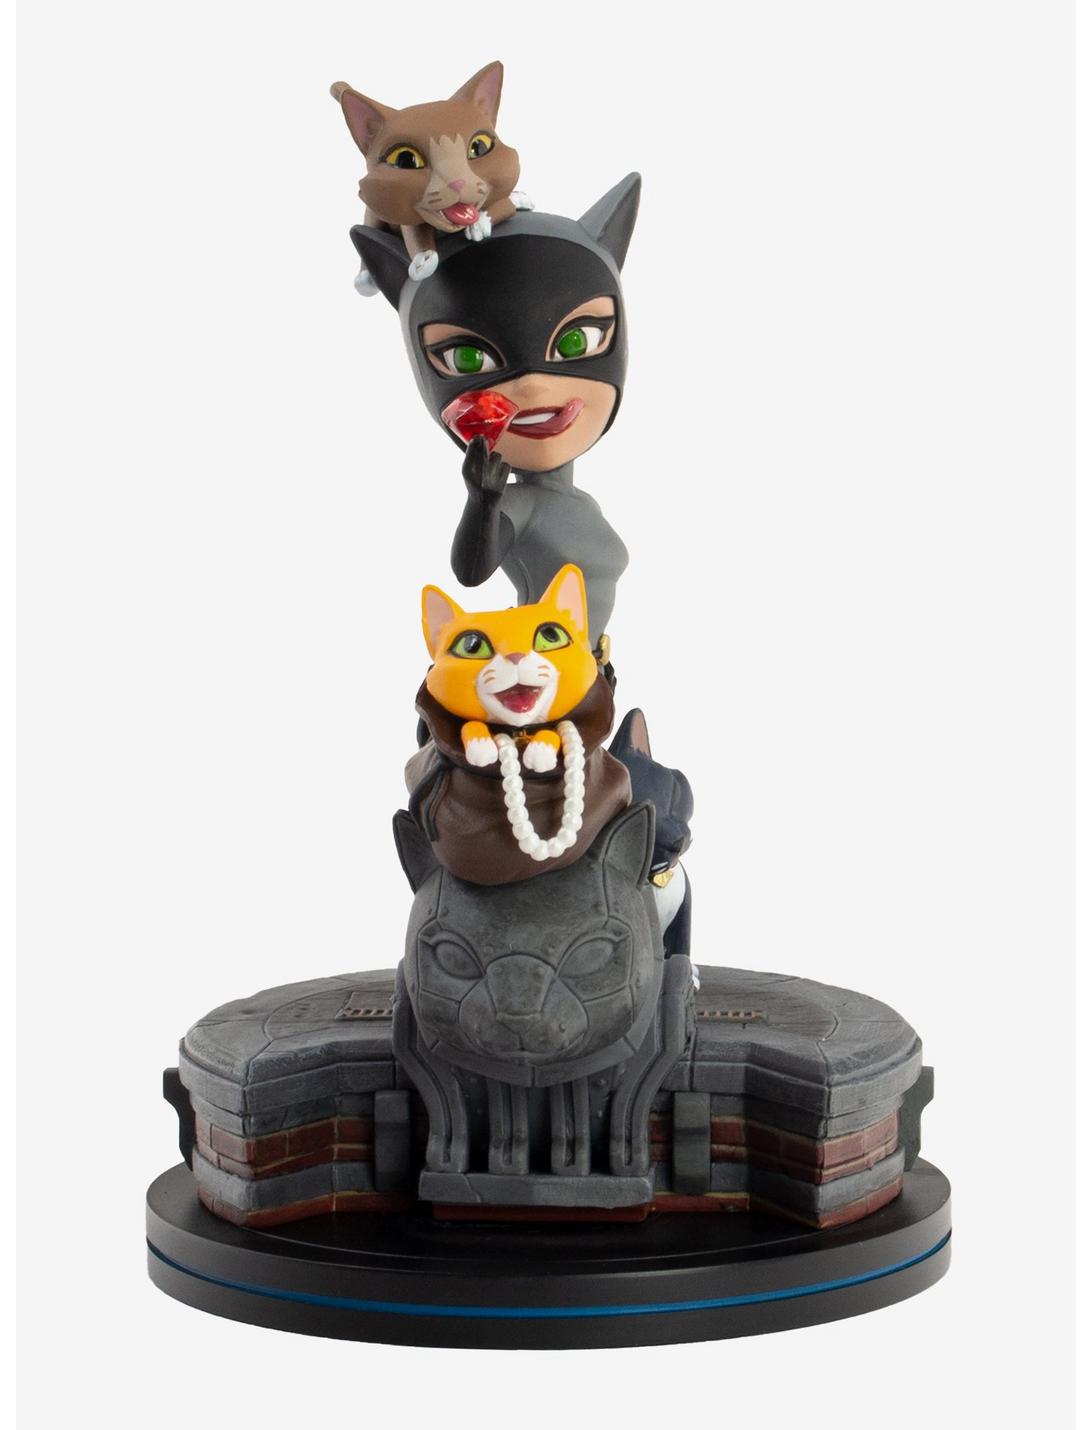 New  from the DC Comics Series Catwoman  8'' Madame Alexander Doll 